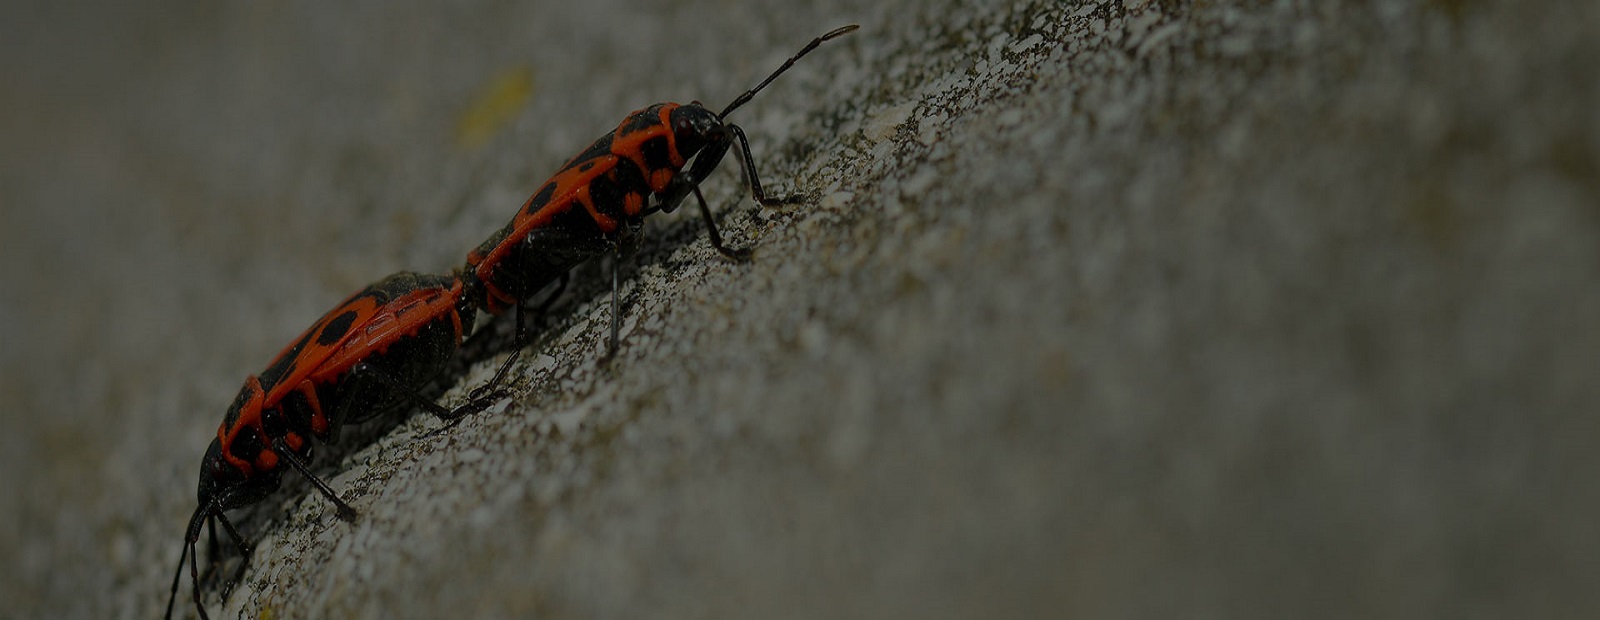 a bug with black and red spots